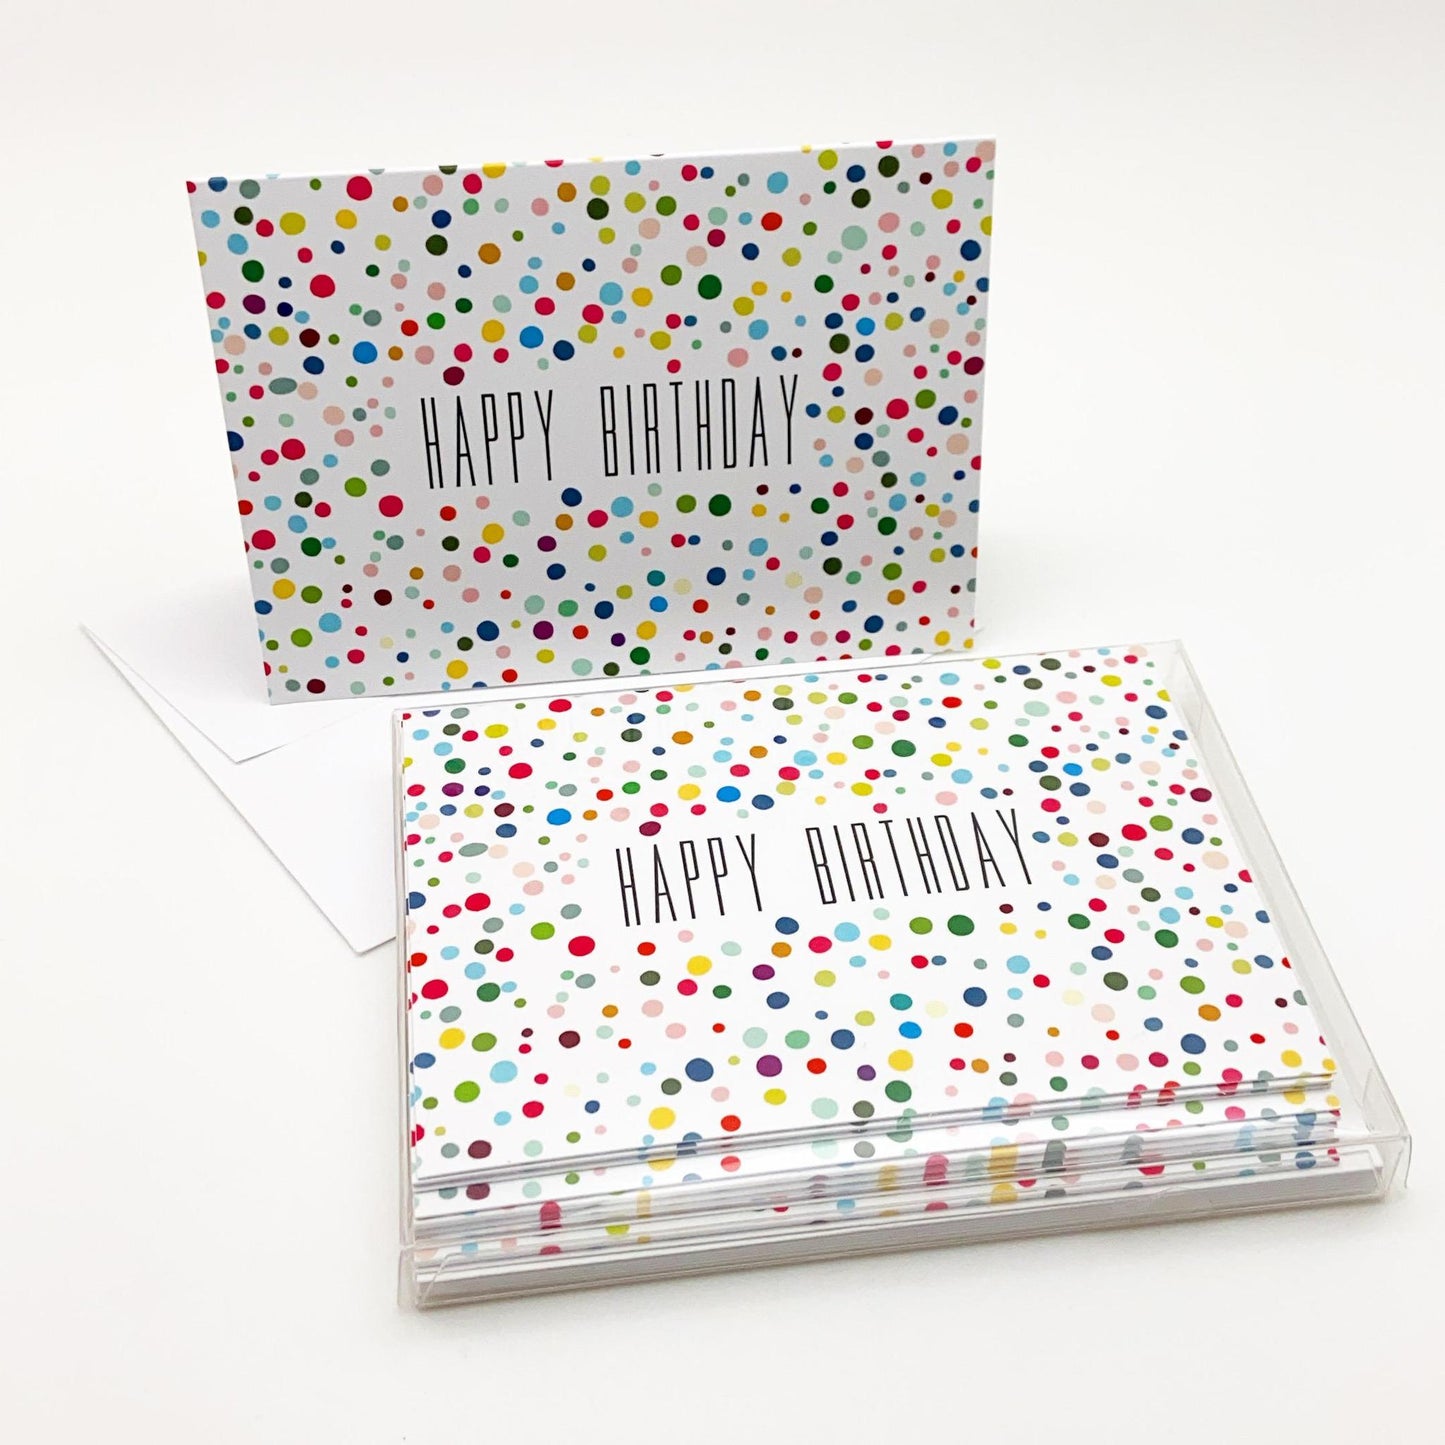 Card Set - "Happy Birthday" Confetti - Pack of 10 - Printed